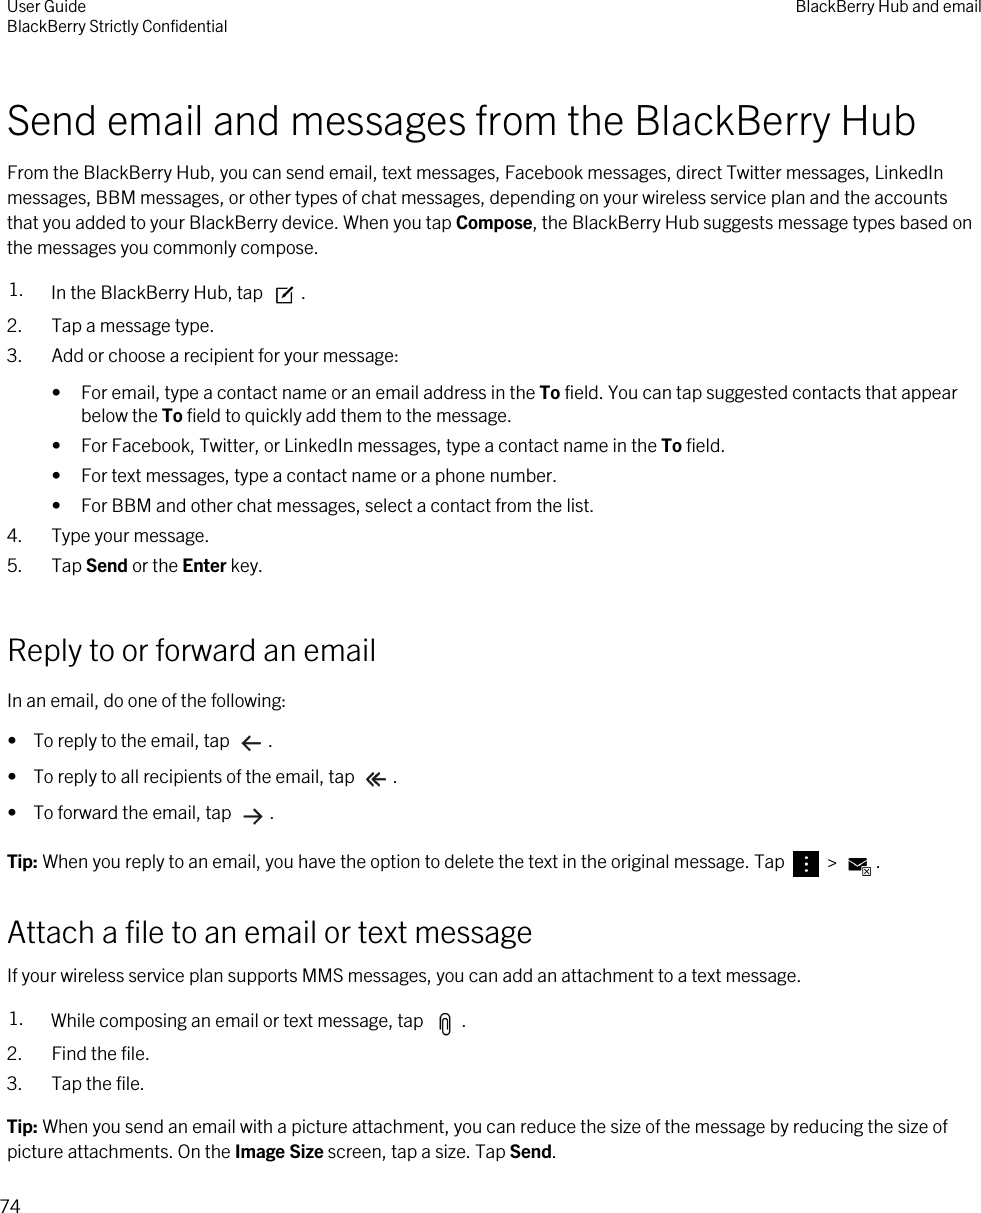 Send email and messages from the BlackBerry HubFrom the BlackBerry Hub, you can send email, text messages, Facebook messages, direct Twitter messages, LinkedIn messages, BBM messages, or other types of chat messages, depending on your wireless service plan and the accounts that you added to your BlackBerry device. When you tap Compose, the BlackBerry Hub suggests message types based on the messages you commonly compose.1. In the BlackBerry Hub, tap  .2. Tap a message type.3. Add or choose a recipient for your message:• For email, type a contact name or an email address in the To field. You can tap suggested contacts that appear below the To field to quickly add them to the message.• For Facebook, Twitter, or LinkedIn messages, type a contact name in the To field.• For text messages, type a contact name or a phone number.• For BBM and other chat messages, select a contact from the list.4. Type your message.5. Tap Send or the Enter key.Reply to or forward an emailIn an email, do one of the following:•  To reply to the email, tap  .•  To reply to all recipients of the email, tap  .•  To forward the email, tap  .Tip: When you reply to an email, you have the option to delete the text in the original message. Tap   &gt;  .Attach a file to an email or text messageIf your wireless service plan supports MMS messages, you can add an attachment to a text message.1. While composing an email or text message, tap  .2. Find the file.3. Tap the file.Tip: When you send an email with a picture attachment, you can reduce the size of the message by reducing the size of picture attachments. On the Image Size screen, tap a size. Tap Send.User GuideBlackBerry Strictly Confidential BlackBerry Hub and email74